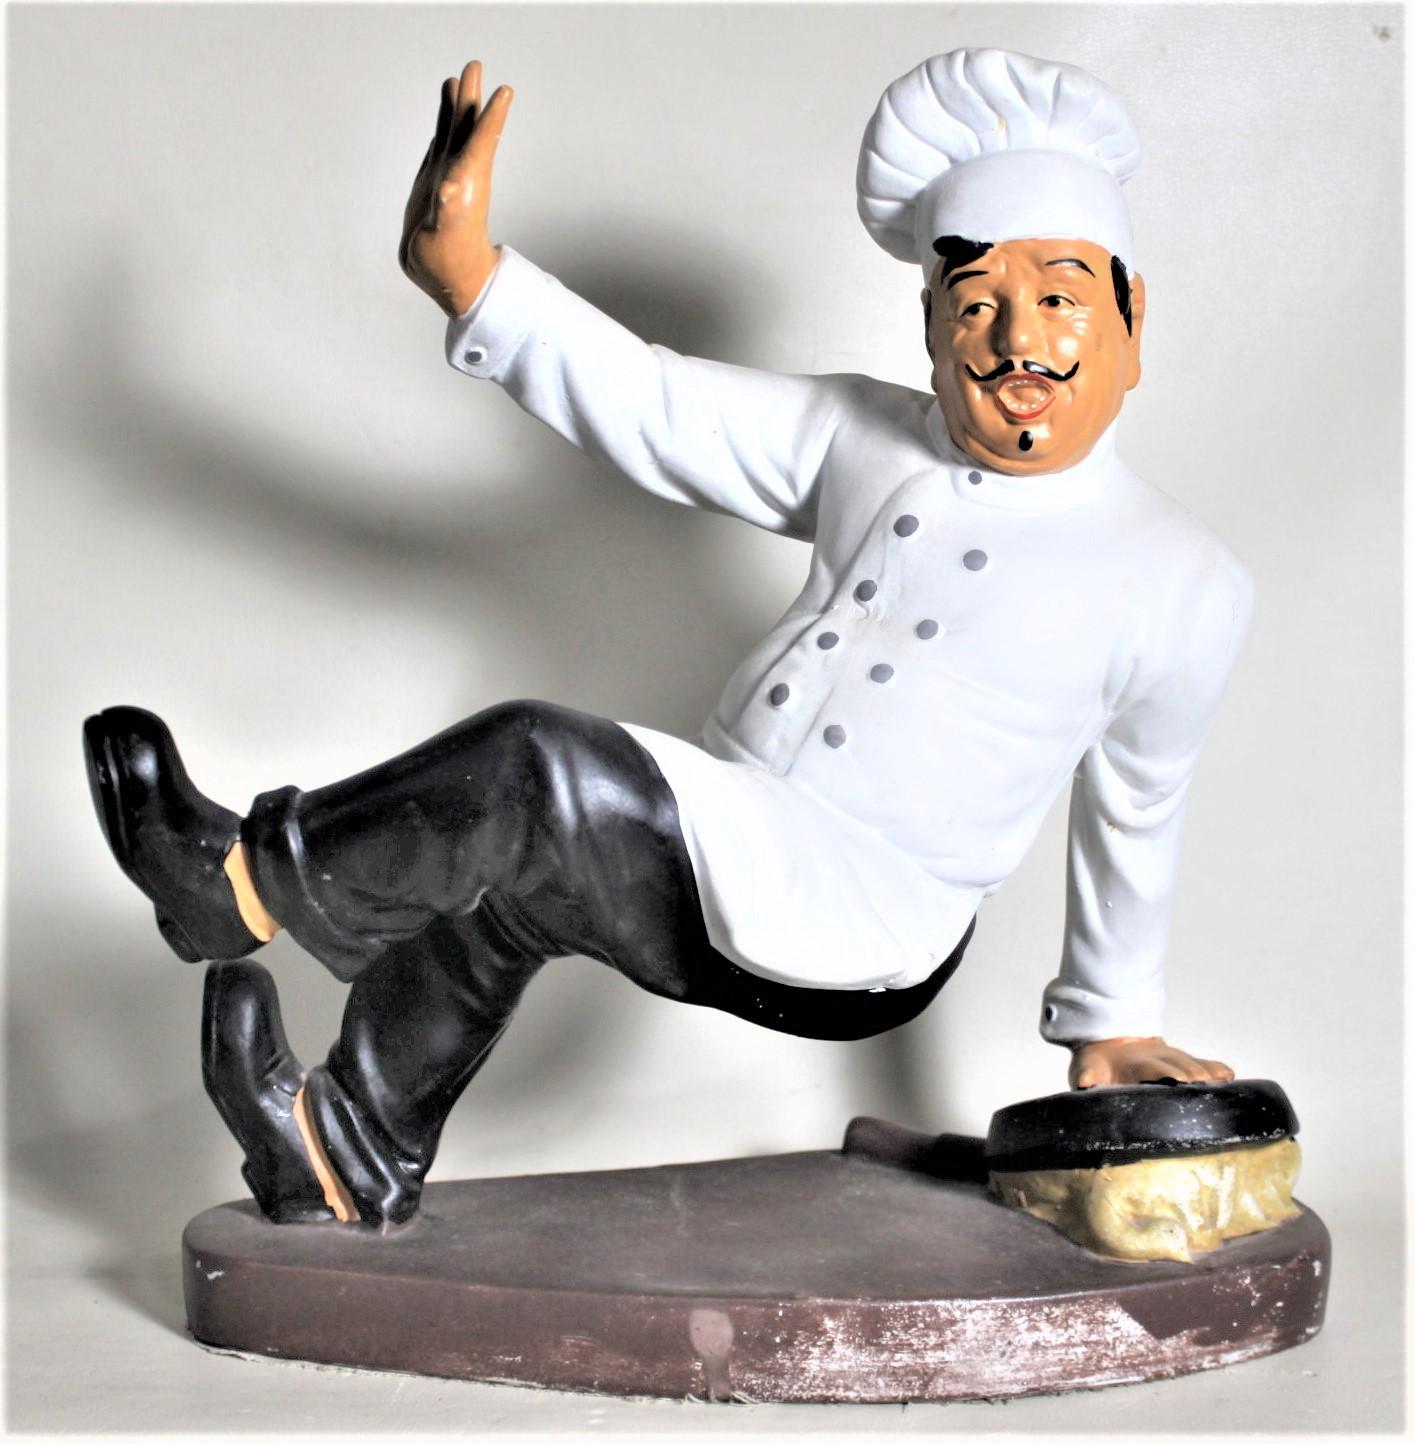 This vintage whimsical figurine or sculpture is unsigned, but presumed to have been made in the United States in circa 1970 in a Modern cartoon style. The sculpture depicts a European chef slipping on on overturned frying pan and trying to balance